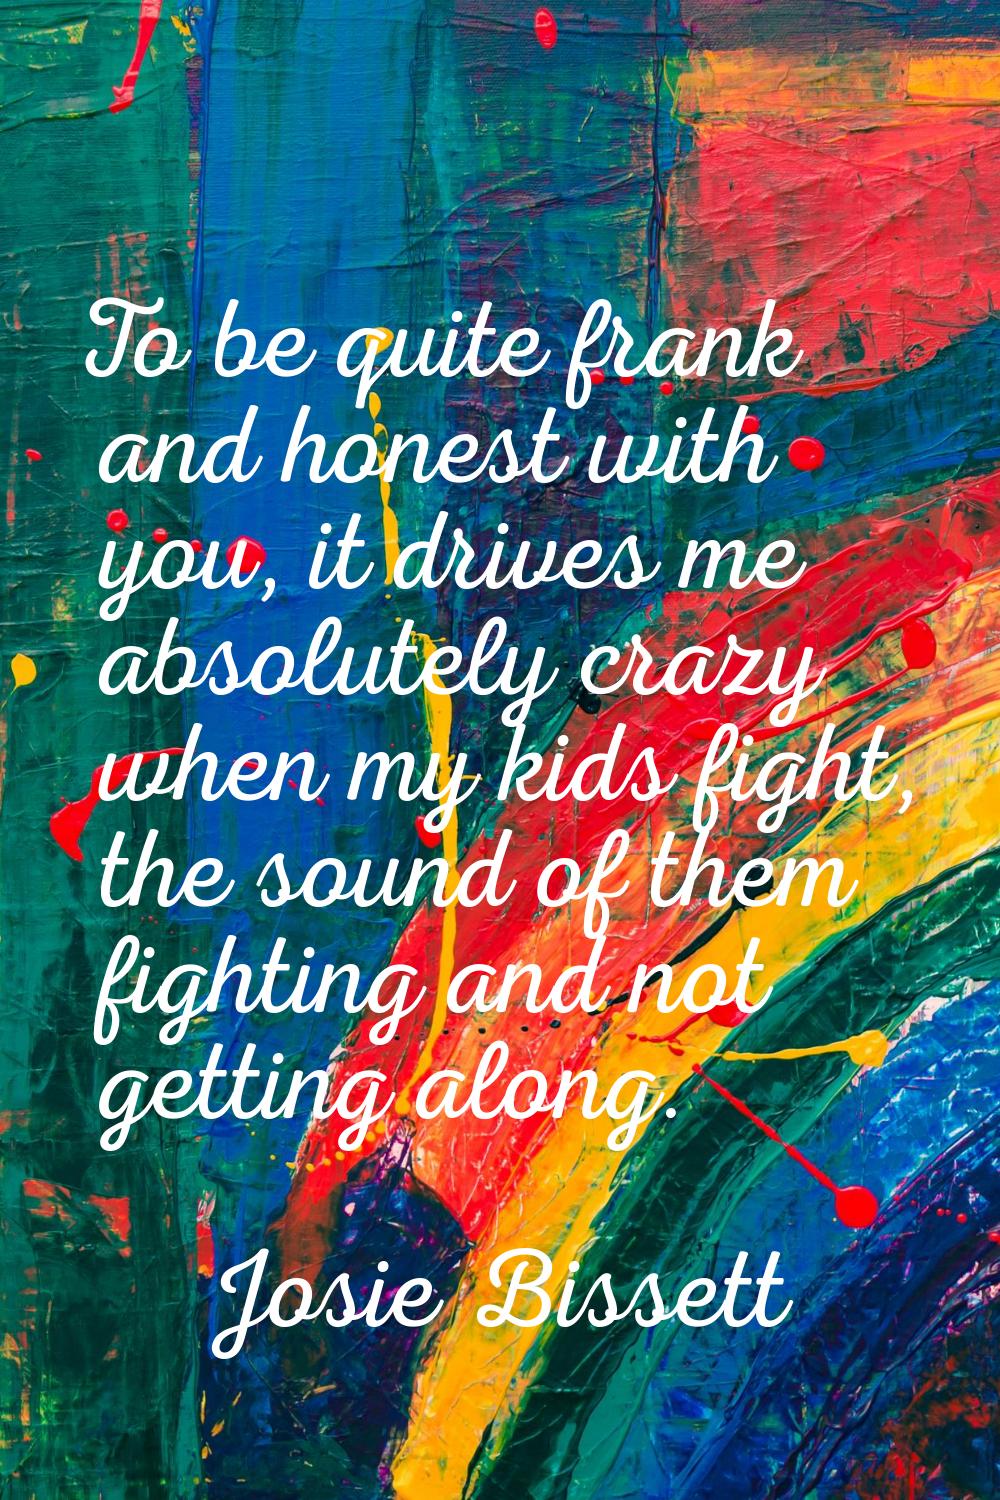 To be quite frank and honest with you, it drives me absolutely crazy when my kids fight, the sound 